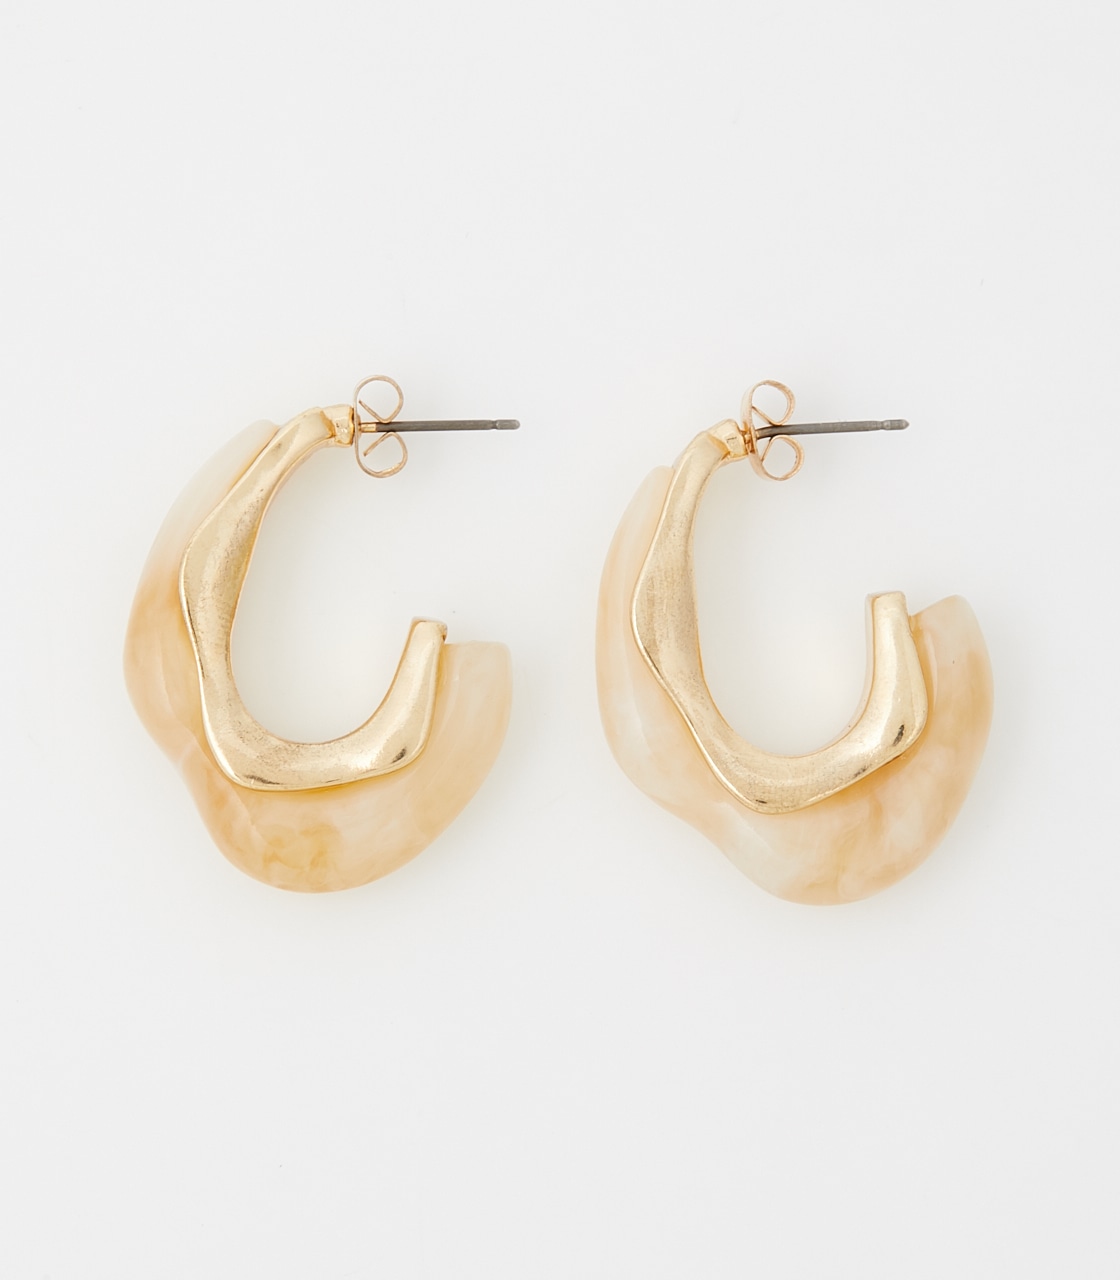 WAVE MARBLE EARRINGS/ウェーブマーブルピアス 詳細画像 柄WHT 1